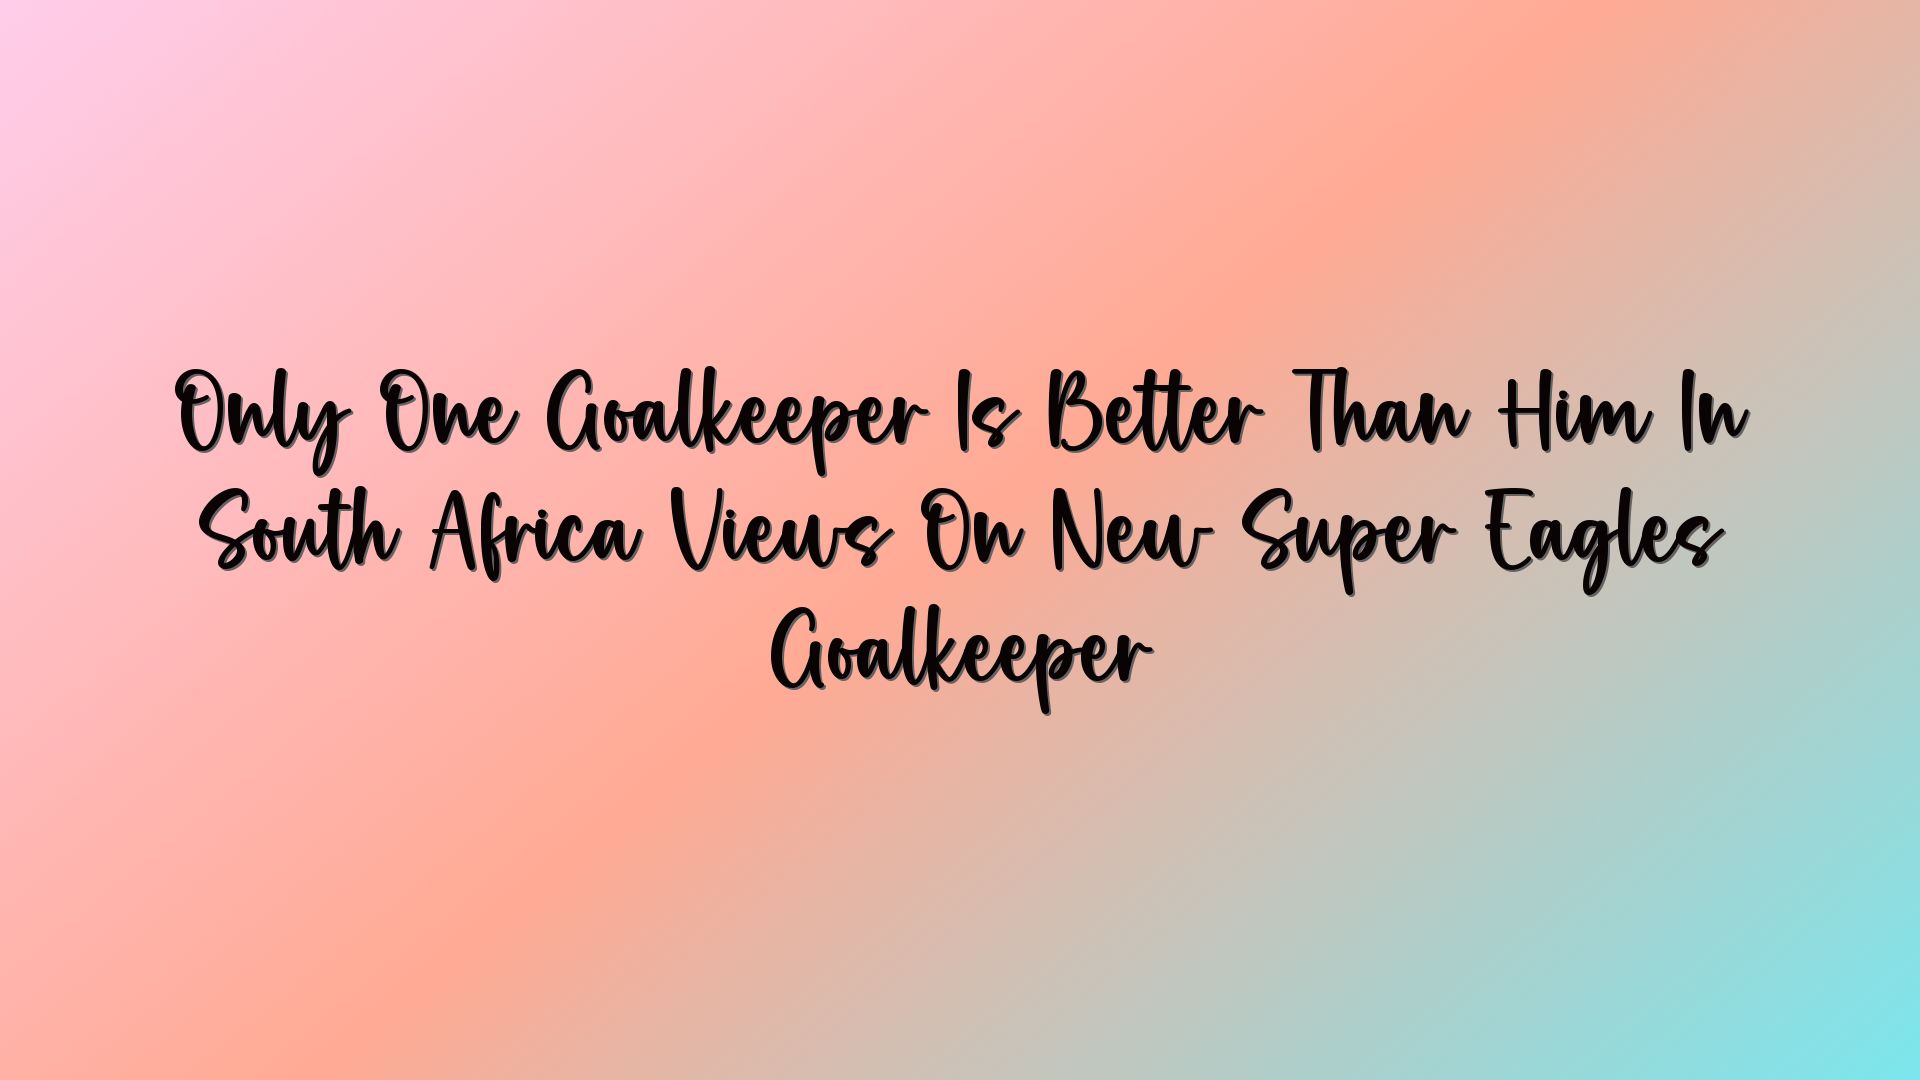 Only One Goalkeeper Is Better Than Him In South Africa Views On New Super Eagles Goalkeeper